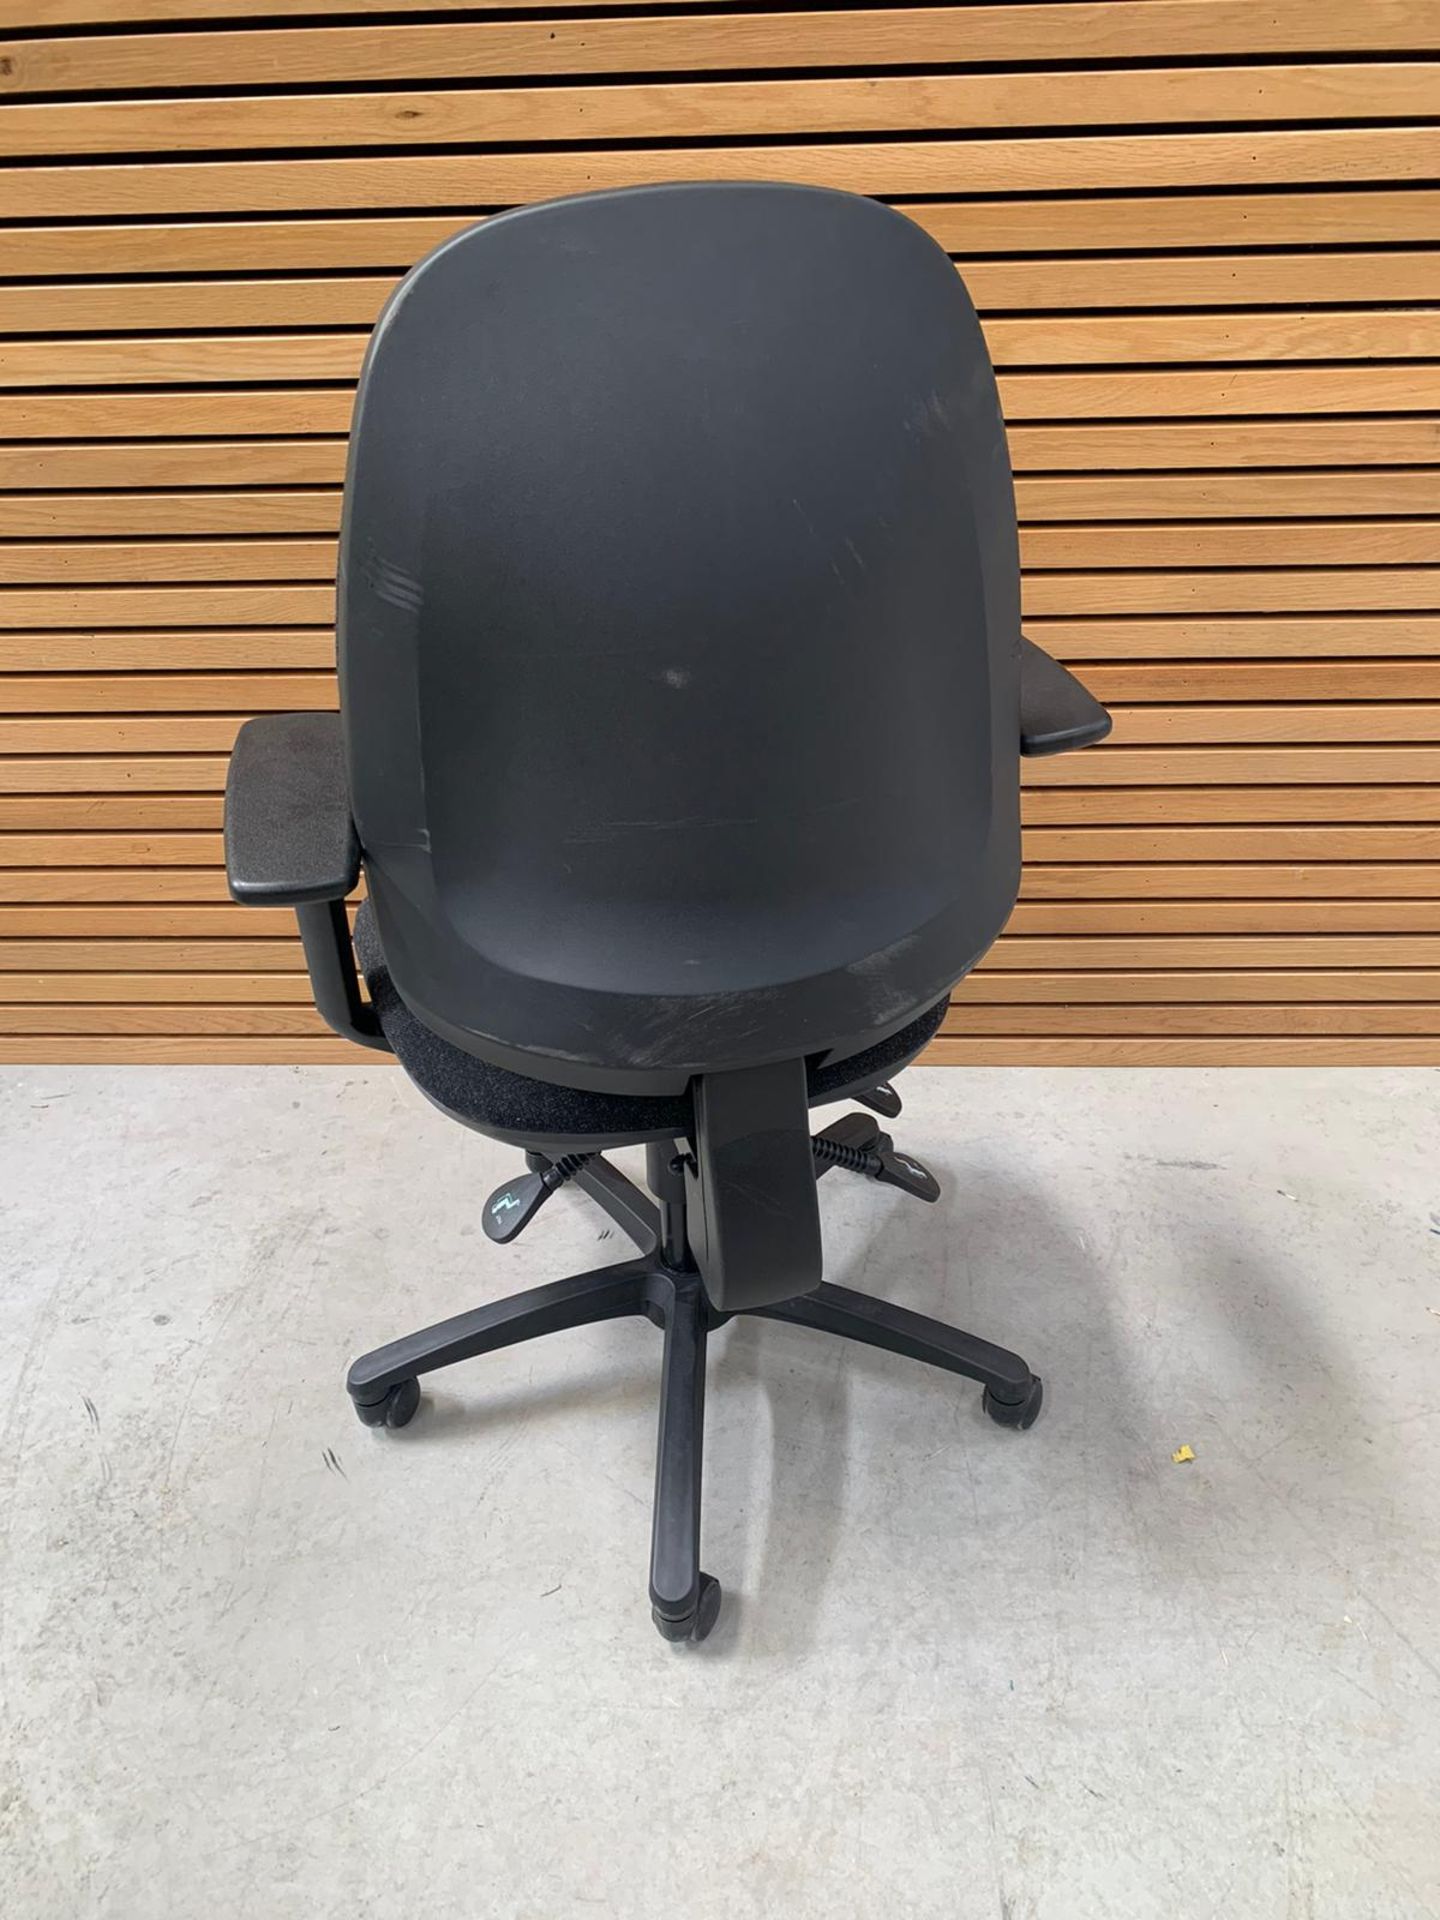 Black Commercial Grade Office Chair - Image 3 of 8